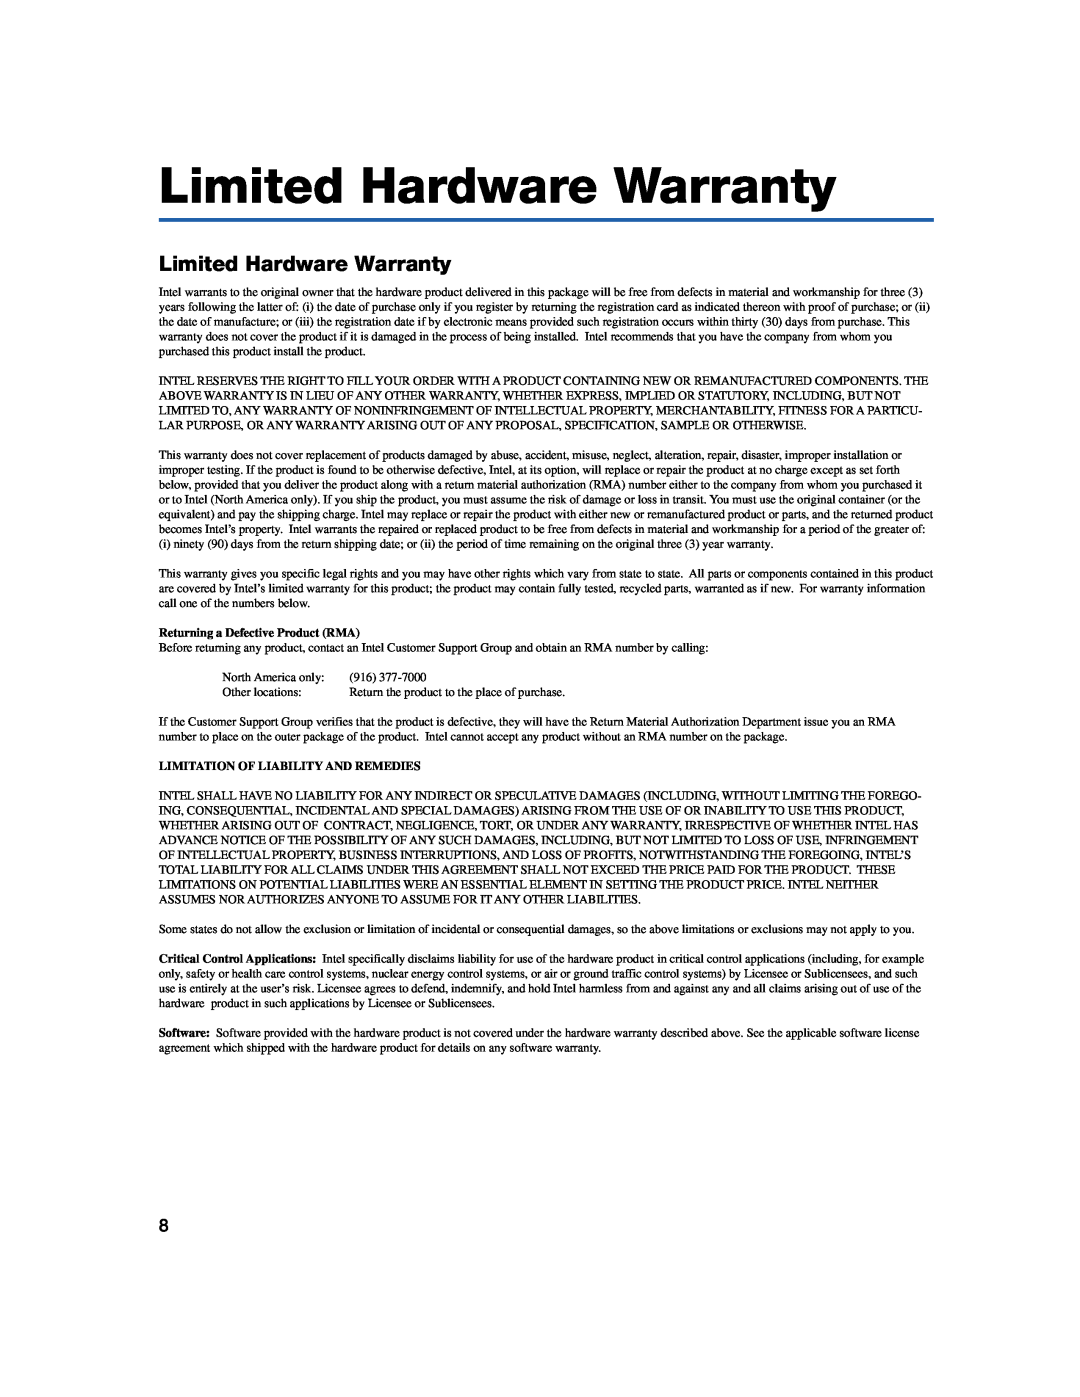 Intel 330T quick start Limited Hardware Warranty, Returning a Defective Product RMA, Limitation Of Liability And Remedies 